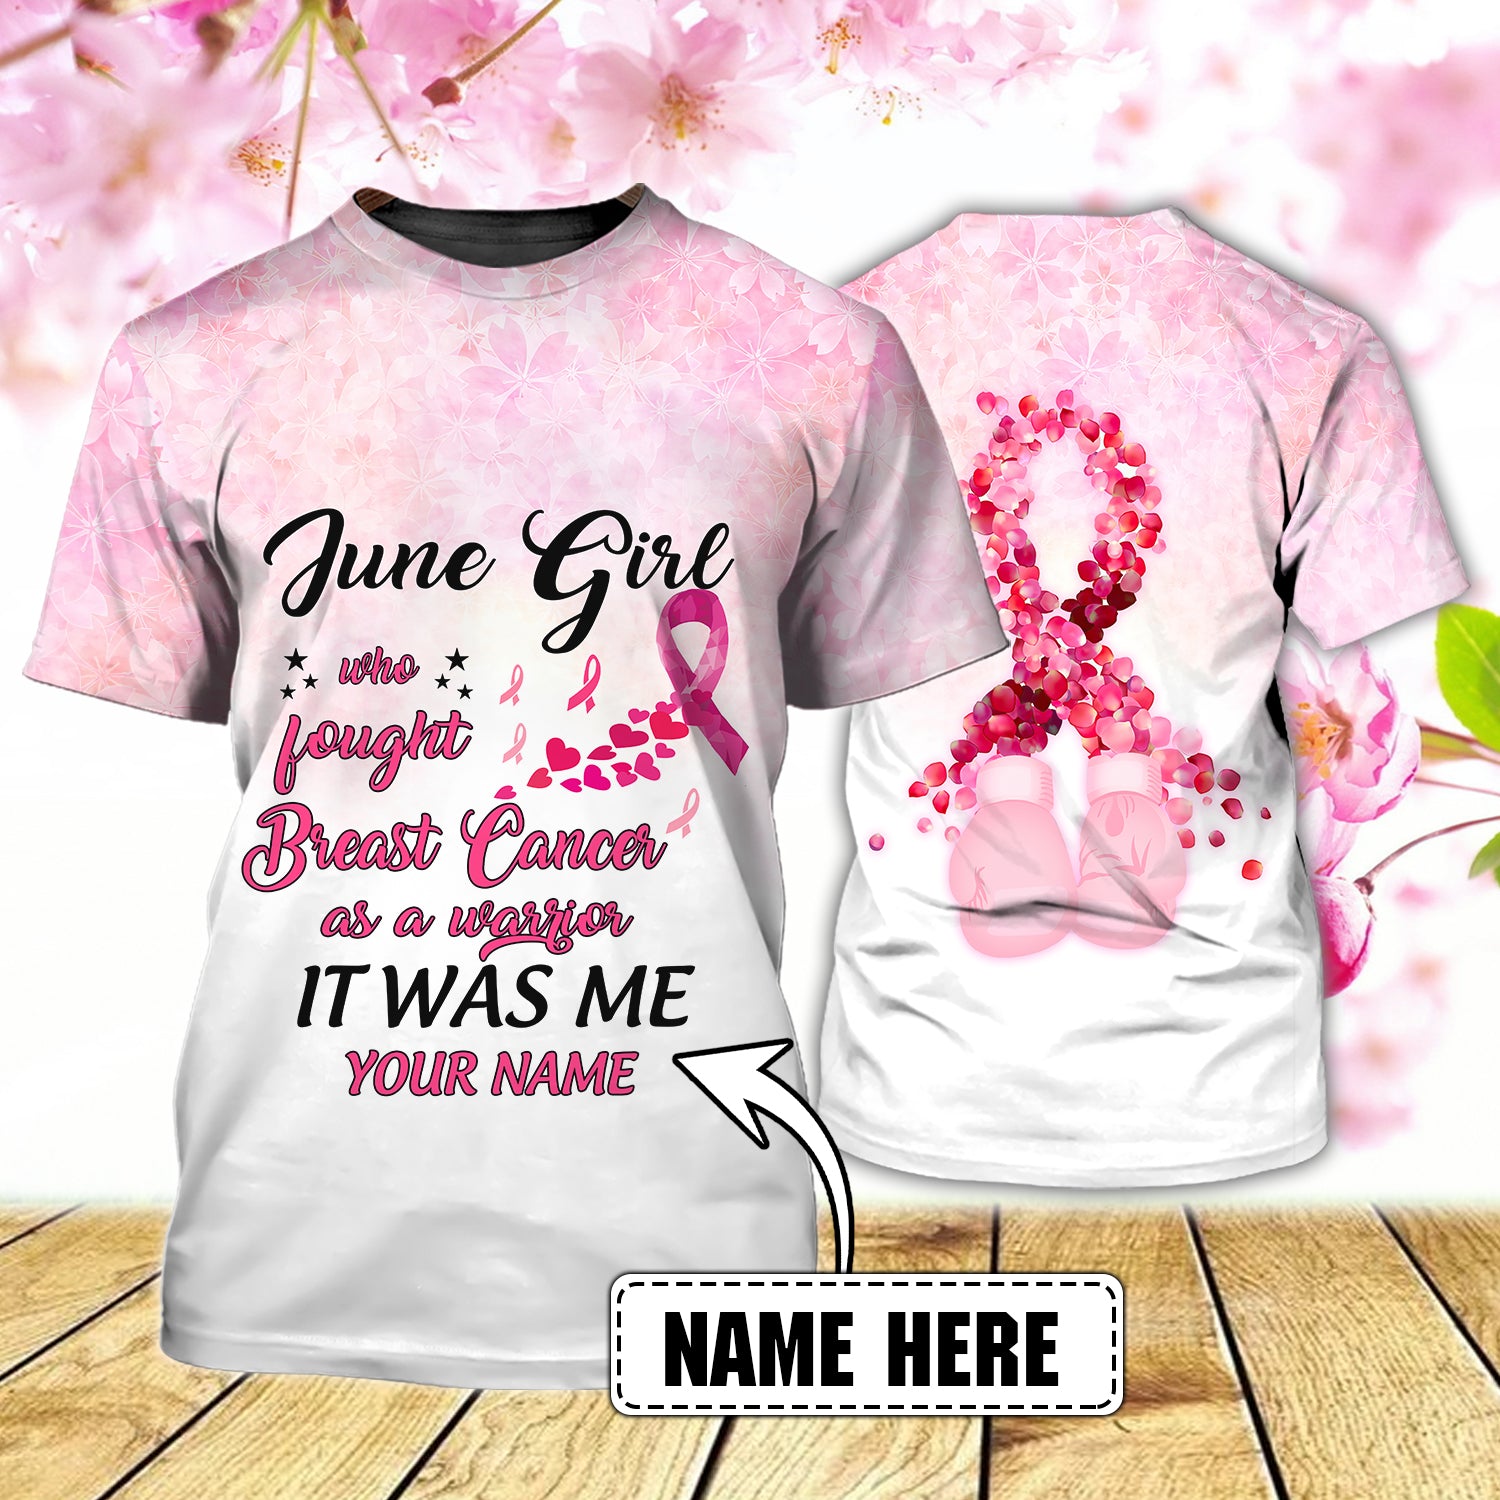 June Girl fought Breast Cancer as a Warrior - Personalized Name 3D Tshirt - Nmd 29